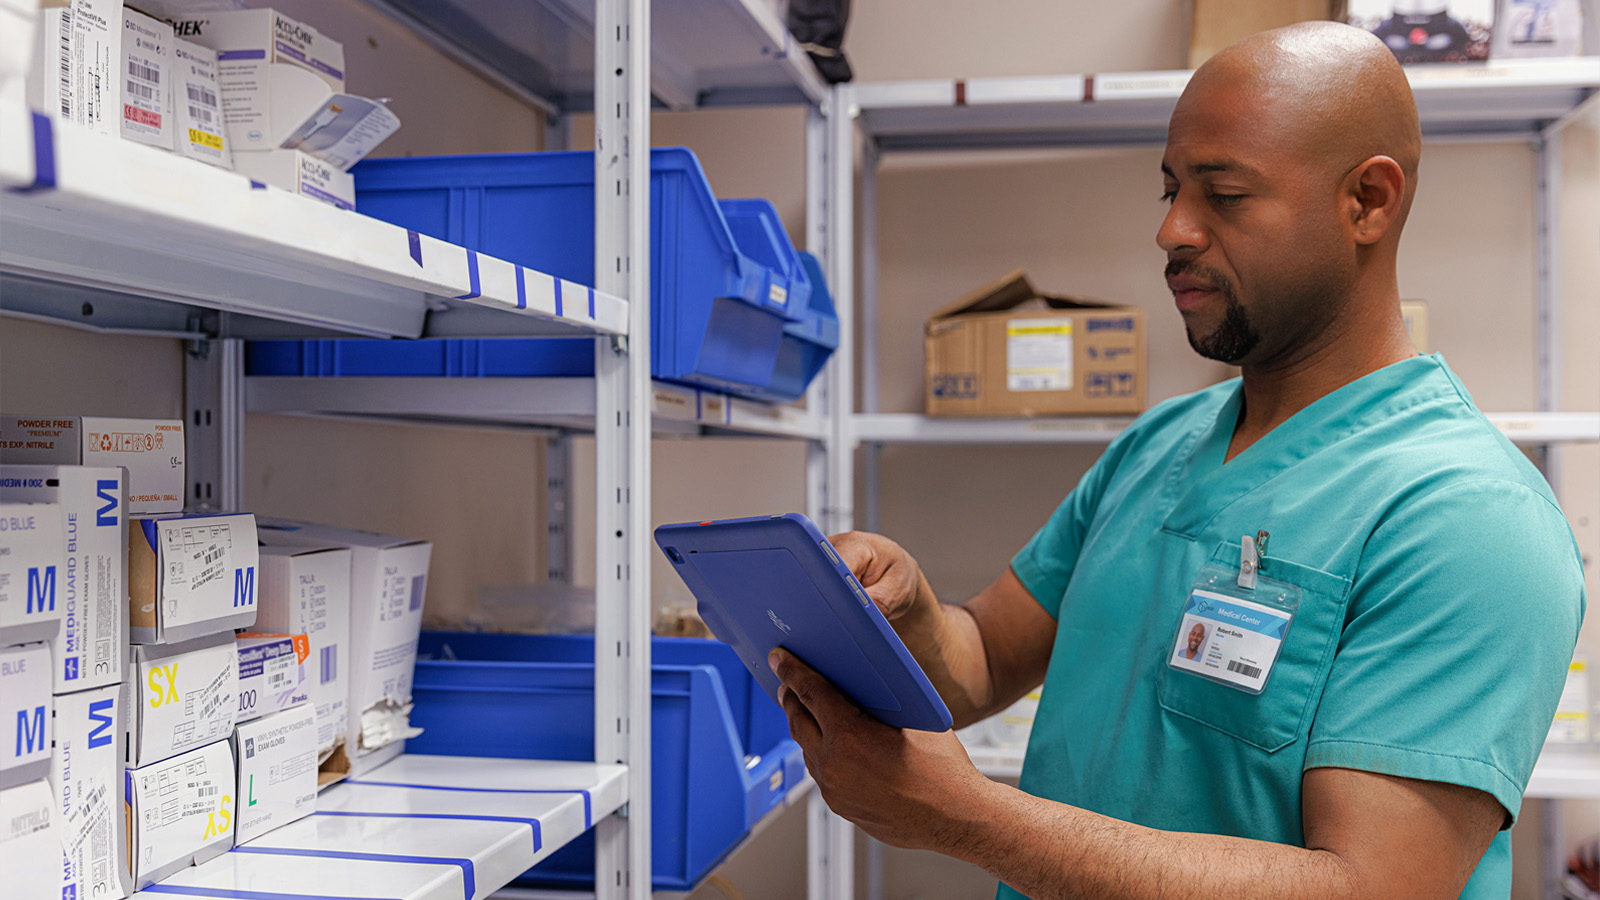 A healthcare professional is in a medical supply warehouse, holding a tablet and searching for information regarding the supplies.